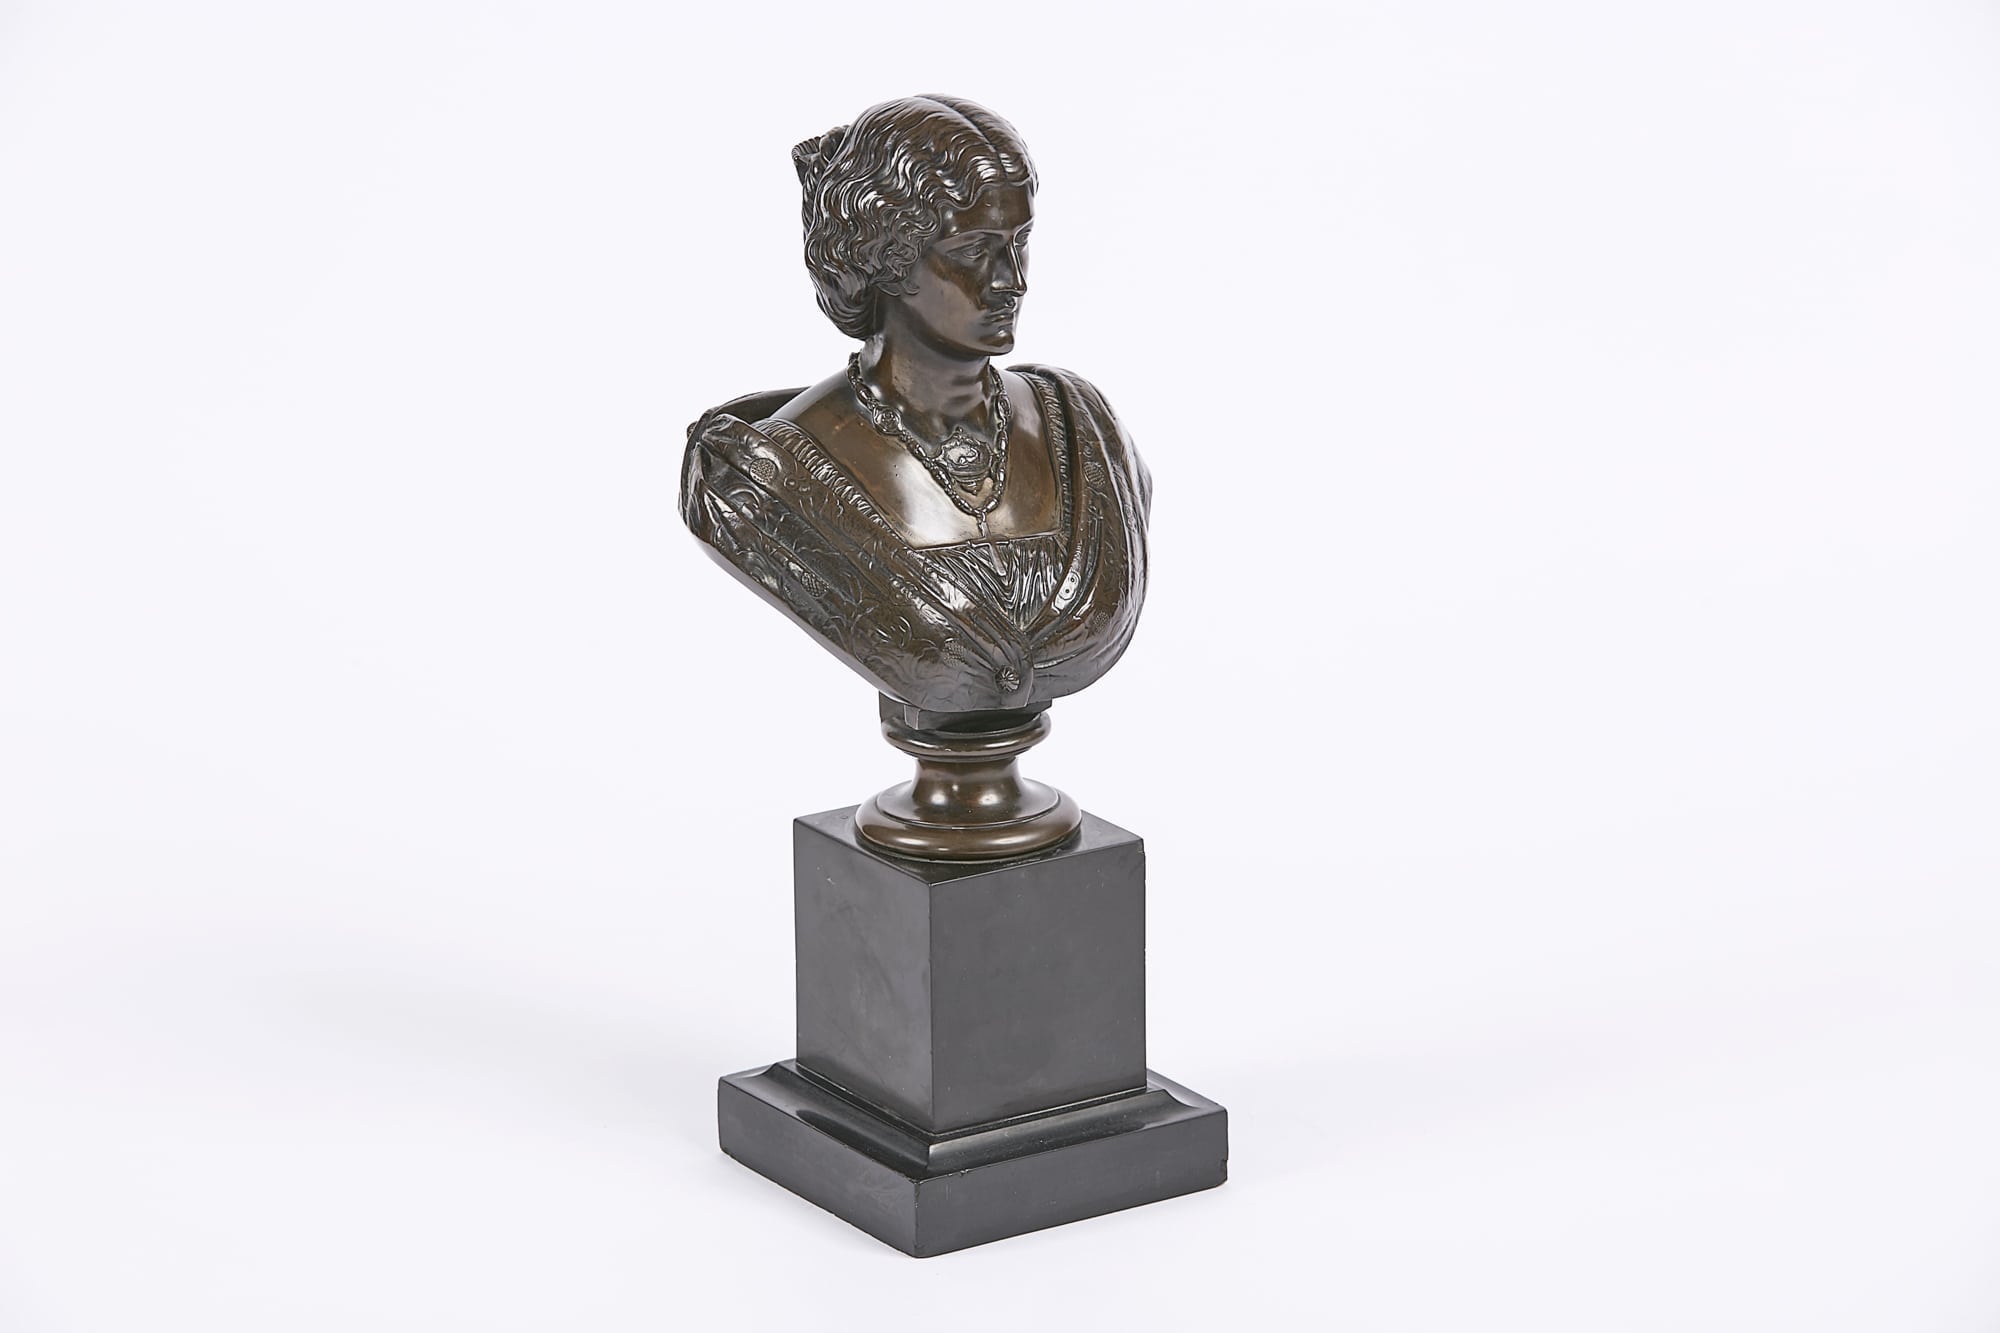 8391 - 19th Century Bronze Bust of Empress Eugenie, by Auguste Cle?singer, (French, 1814-1883), Signed